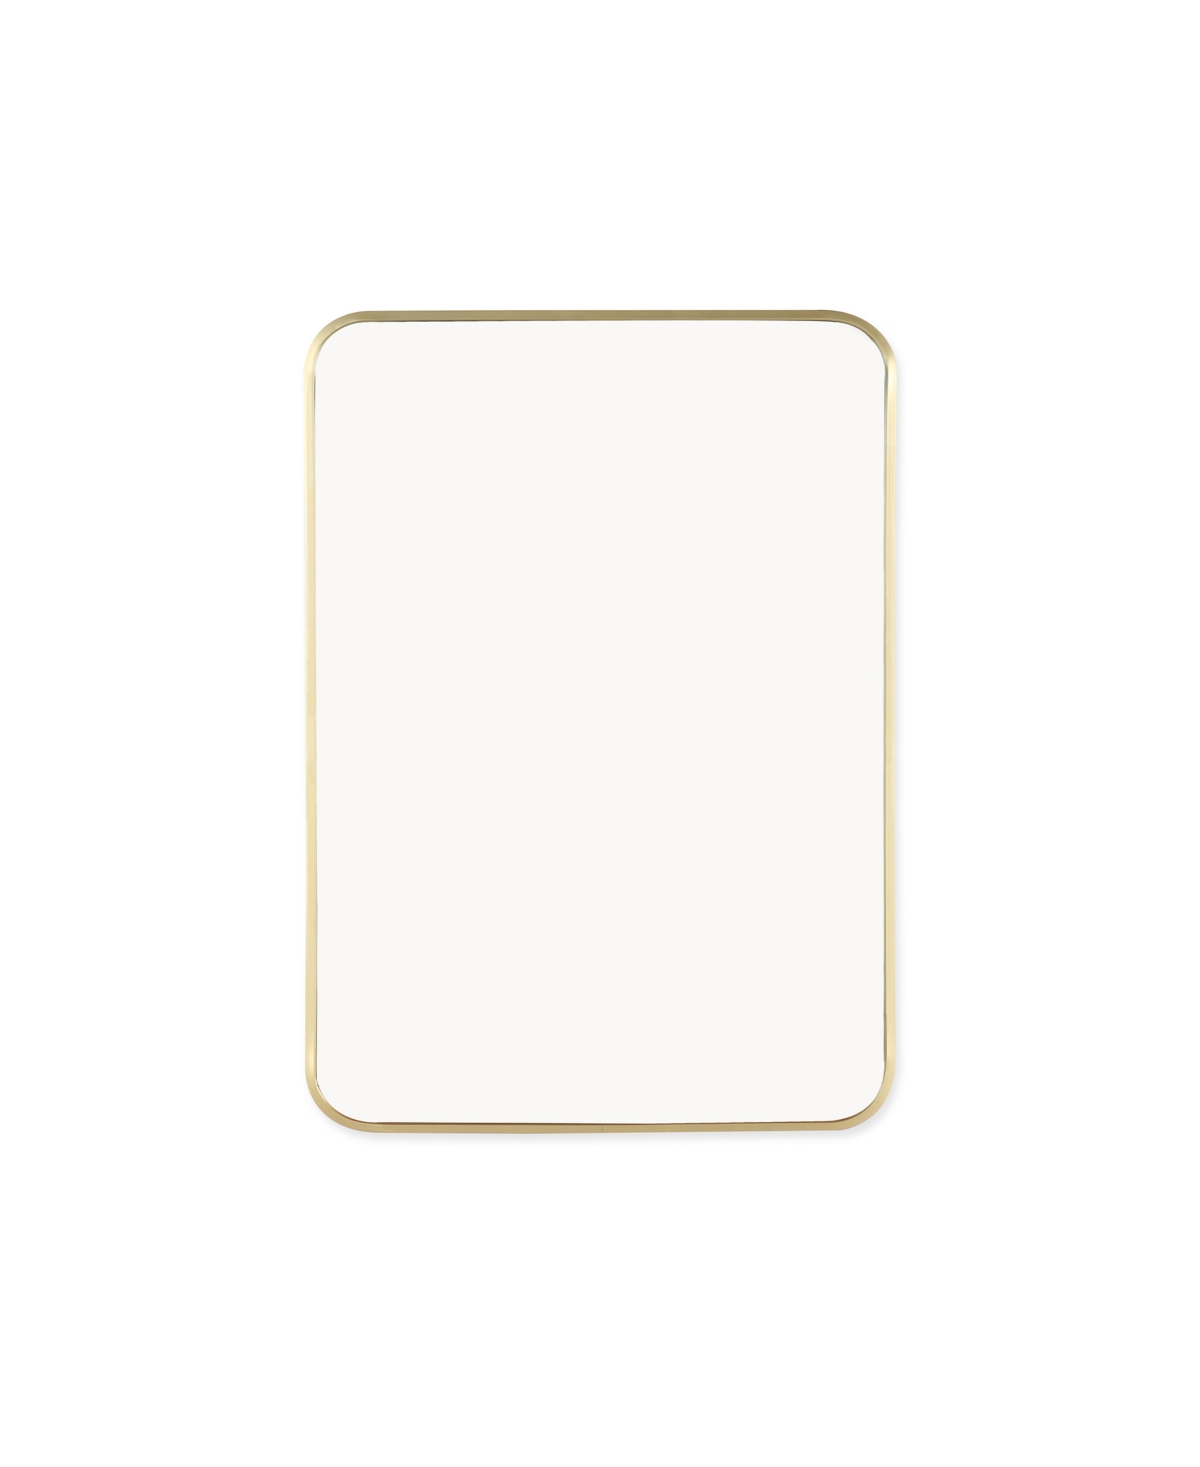 Rounded Rectangle Bathroom Framed Decorative Wall Mirror, 27.5" x 19.7" - Gold